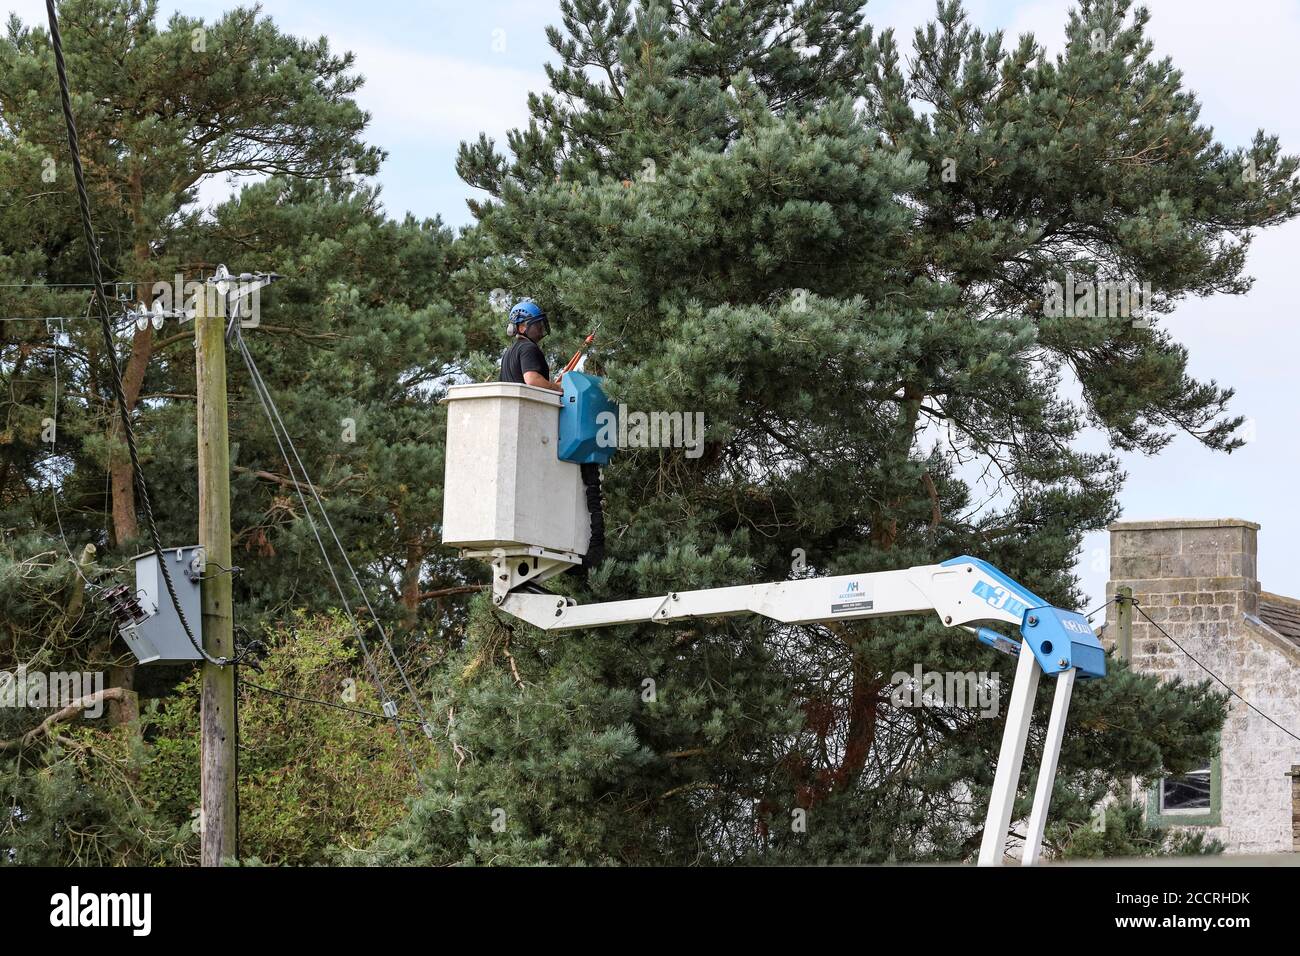 Amey worker carrying out vegetation management for Northern Power Grid on trees surrounding power lines, County Durham, UK Stock Photo